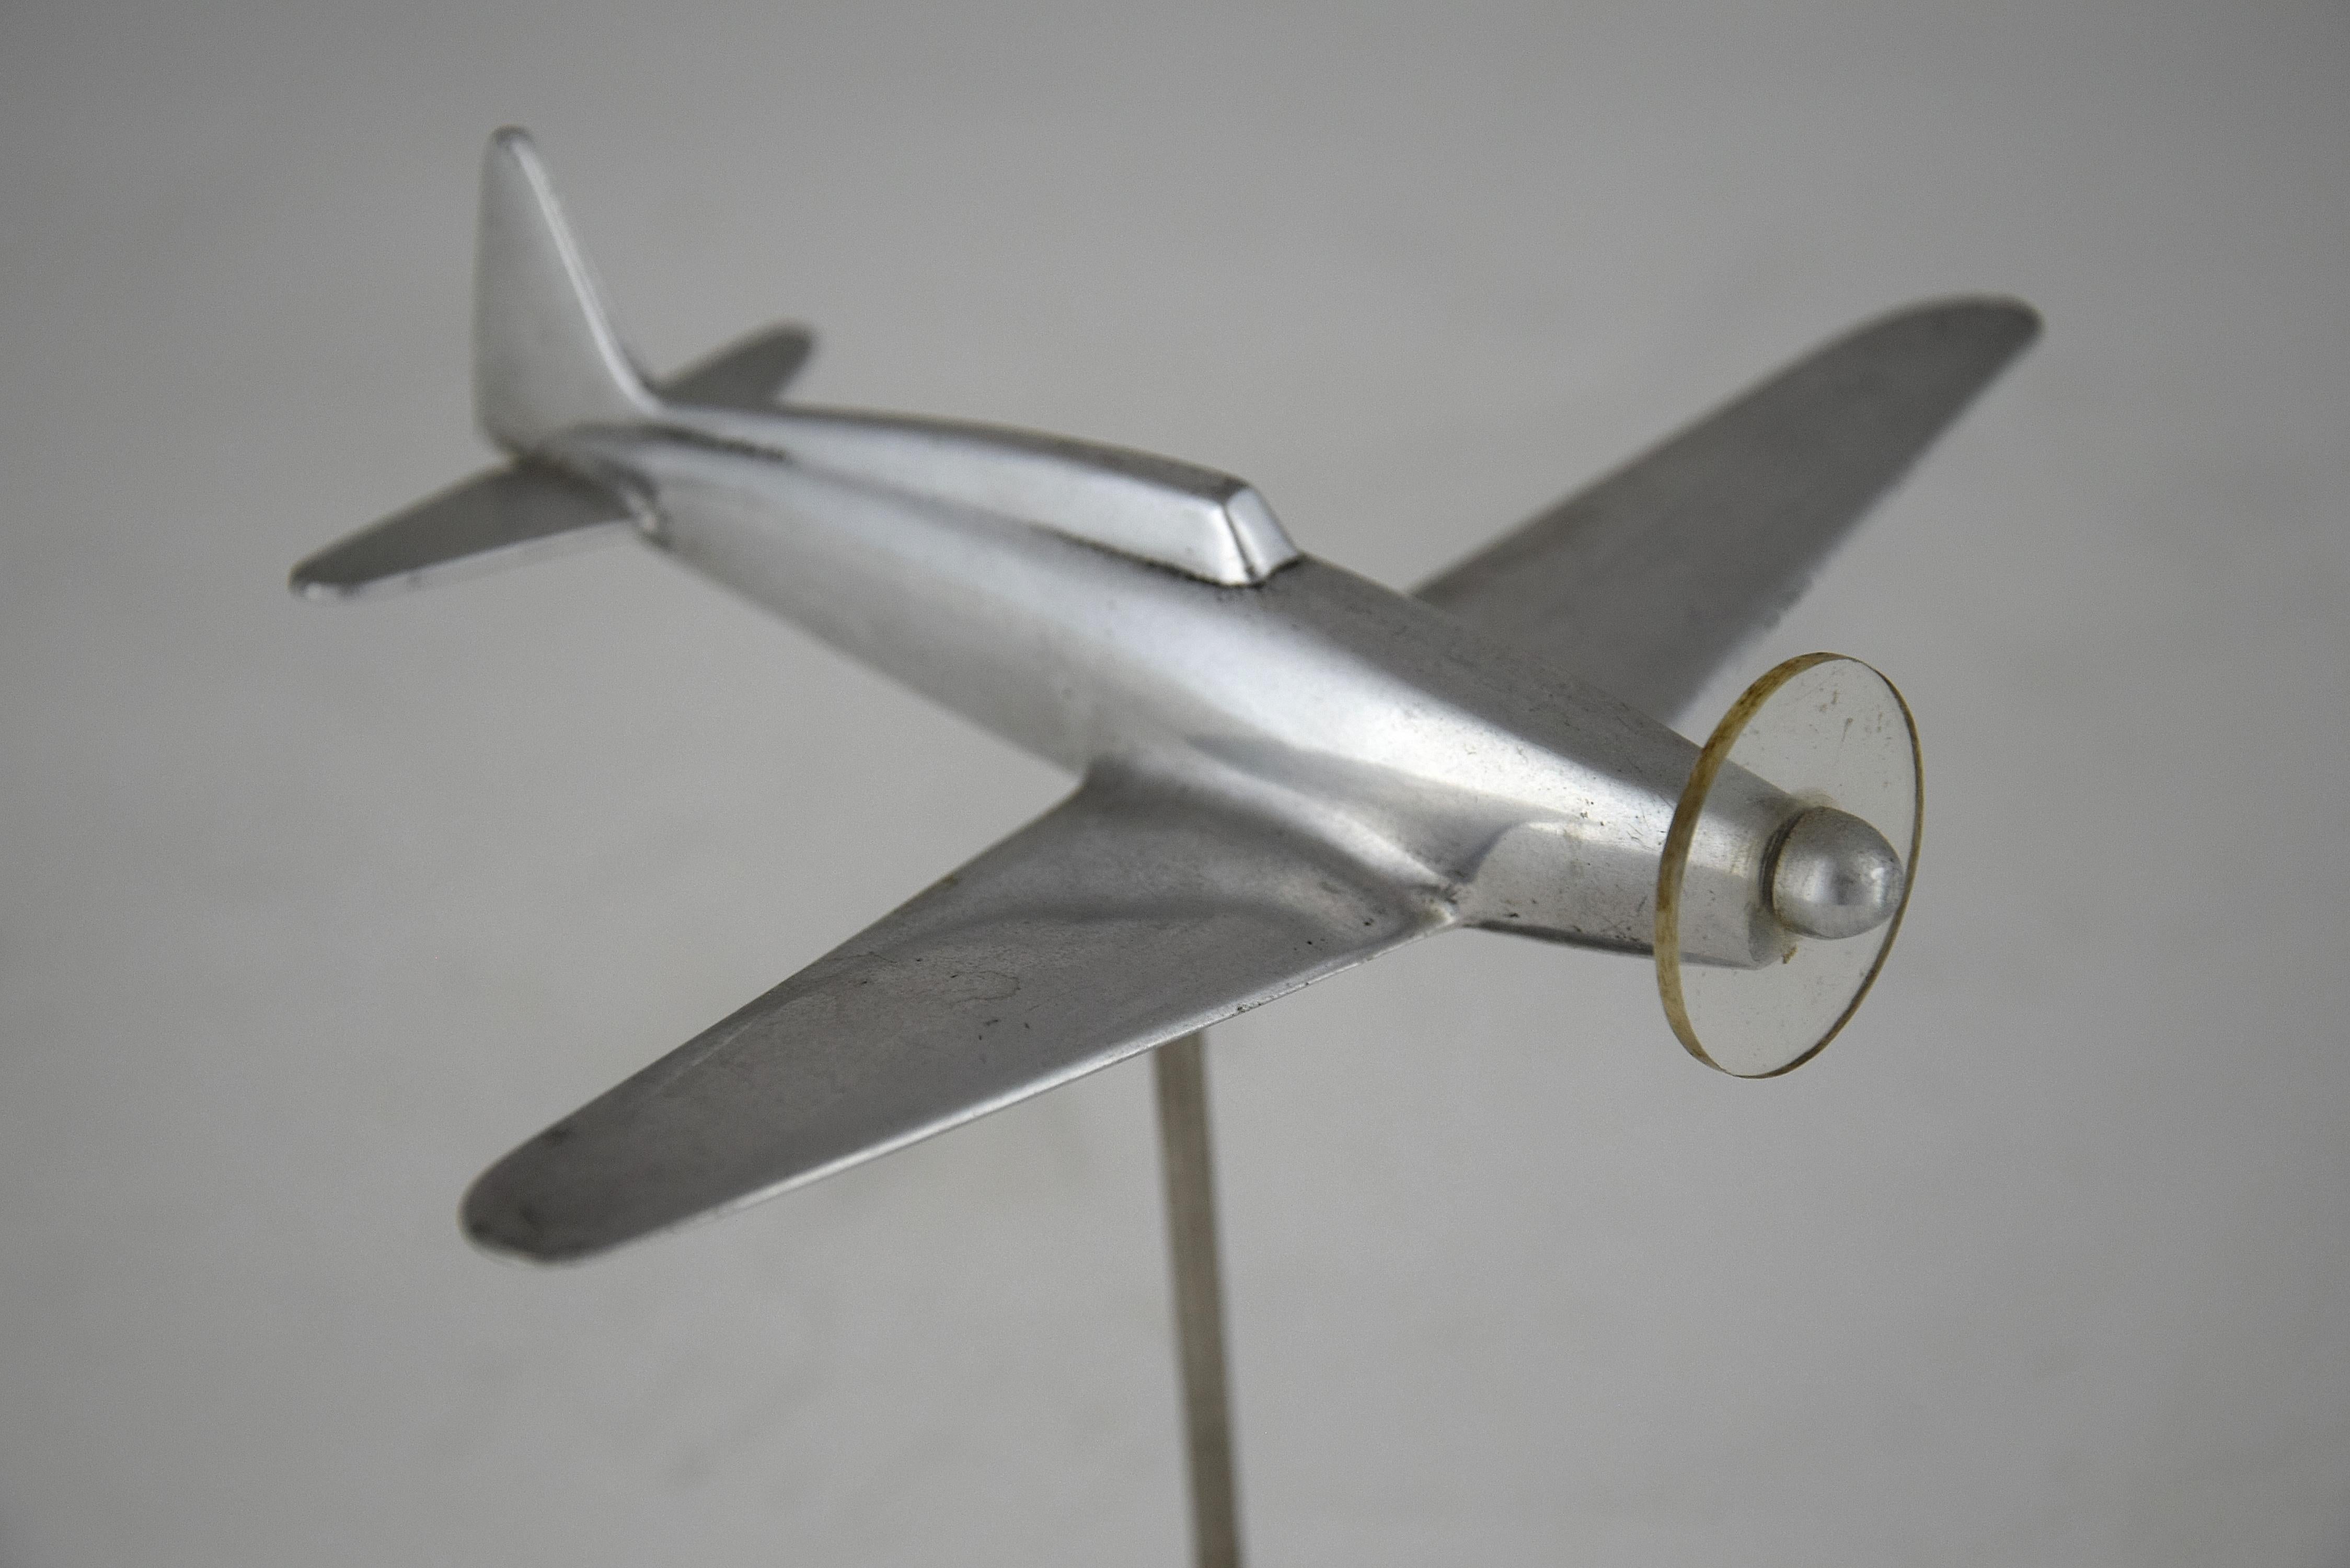 Beautiful metal fighter airplane model of the legendary Spifire which was produced from 1938-1948.
The Spitfire was designed as a short-range, high-performance interceptor aircraft by R. J. Mitchell, chief designer at Supermarine Aviation Works,